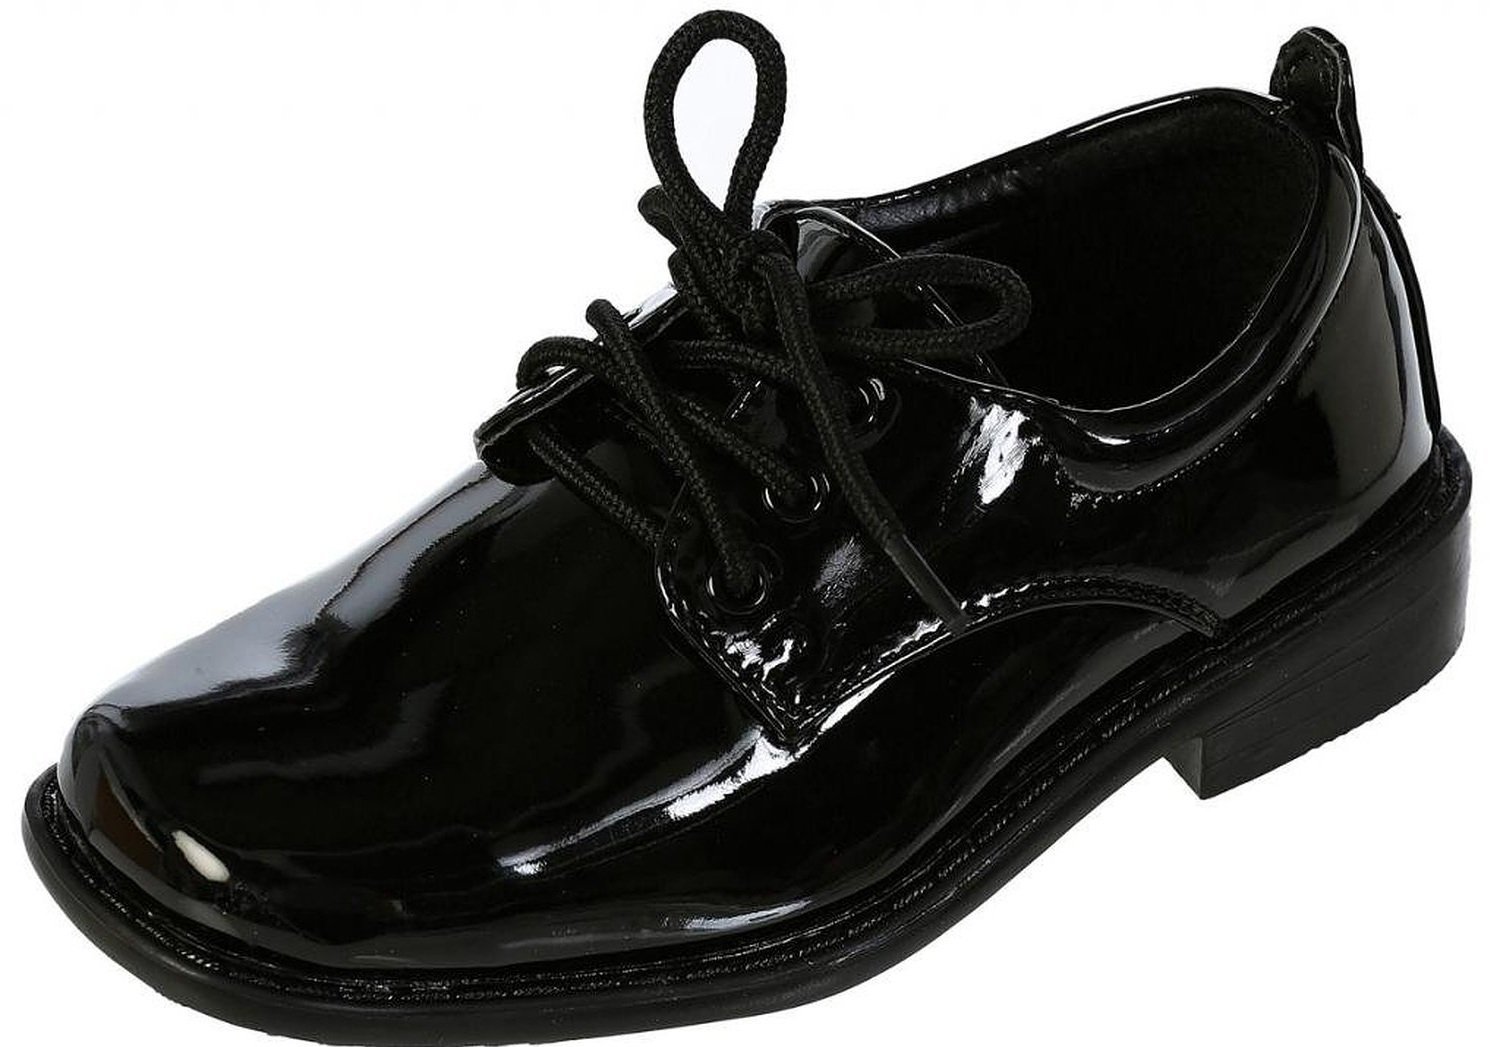 Boys Square Toe Lace Up Oxford Patent Dress Shoes - Available in Black 5 Big Kid